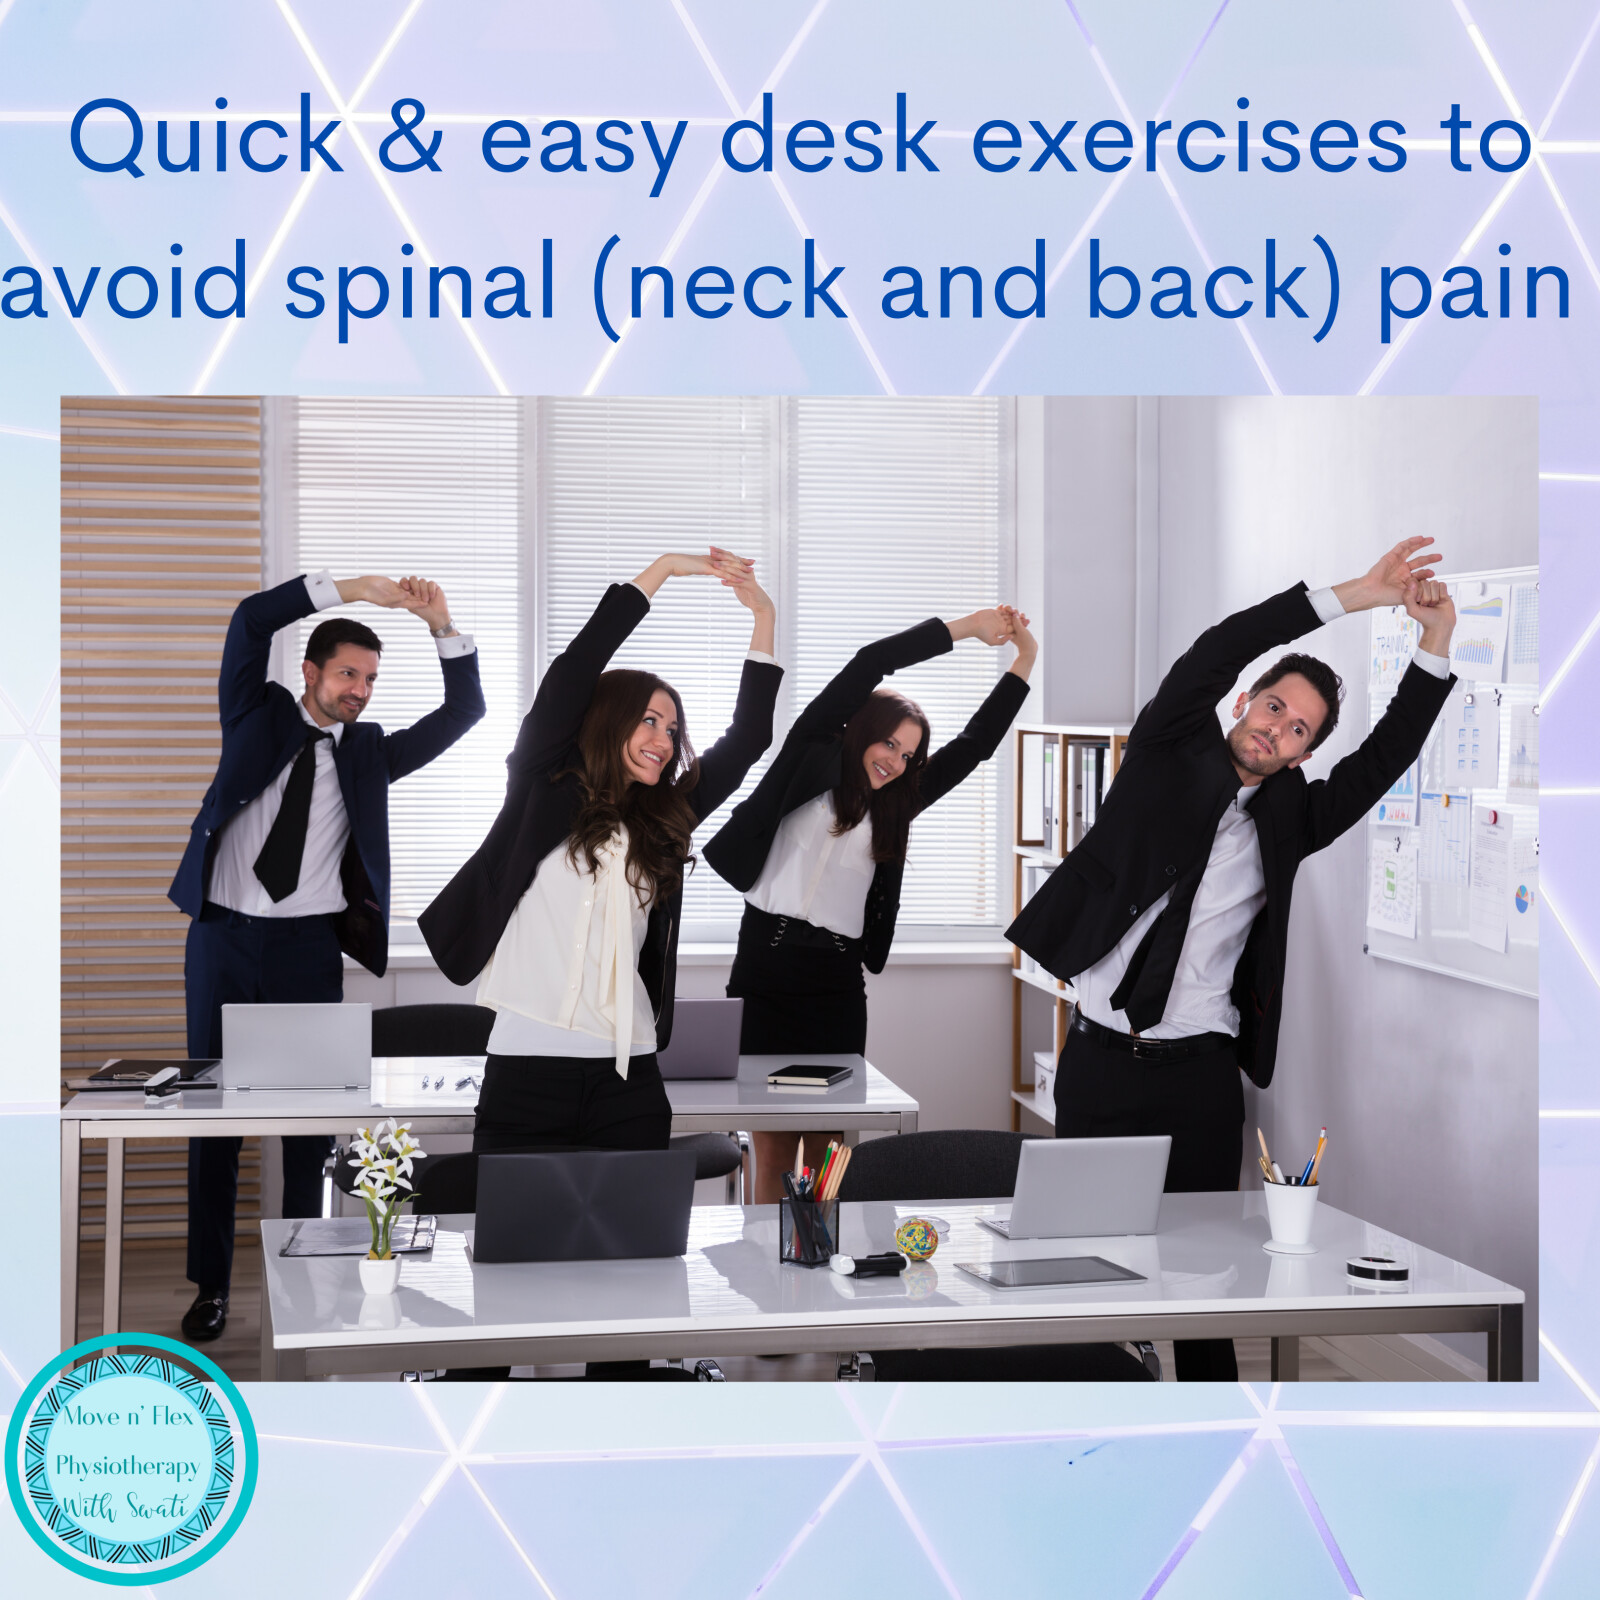 Quick and easy desk exercises to avoid spinal (neck and back) pain